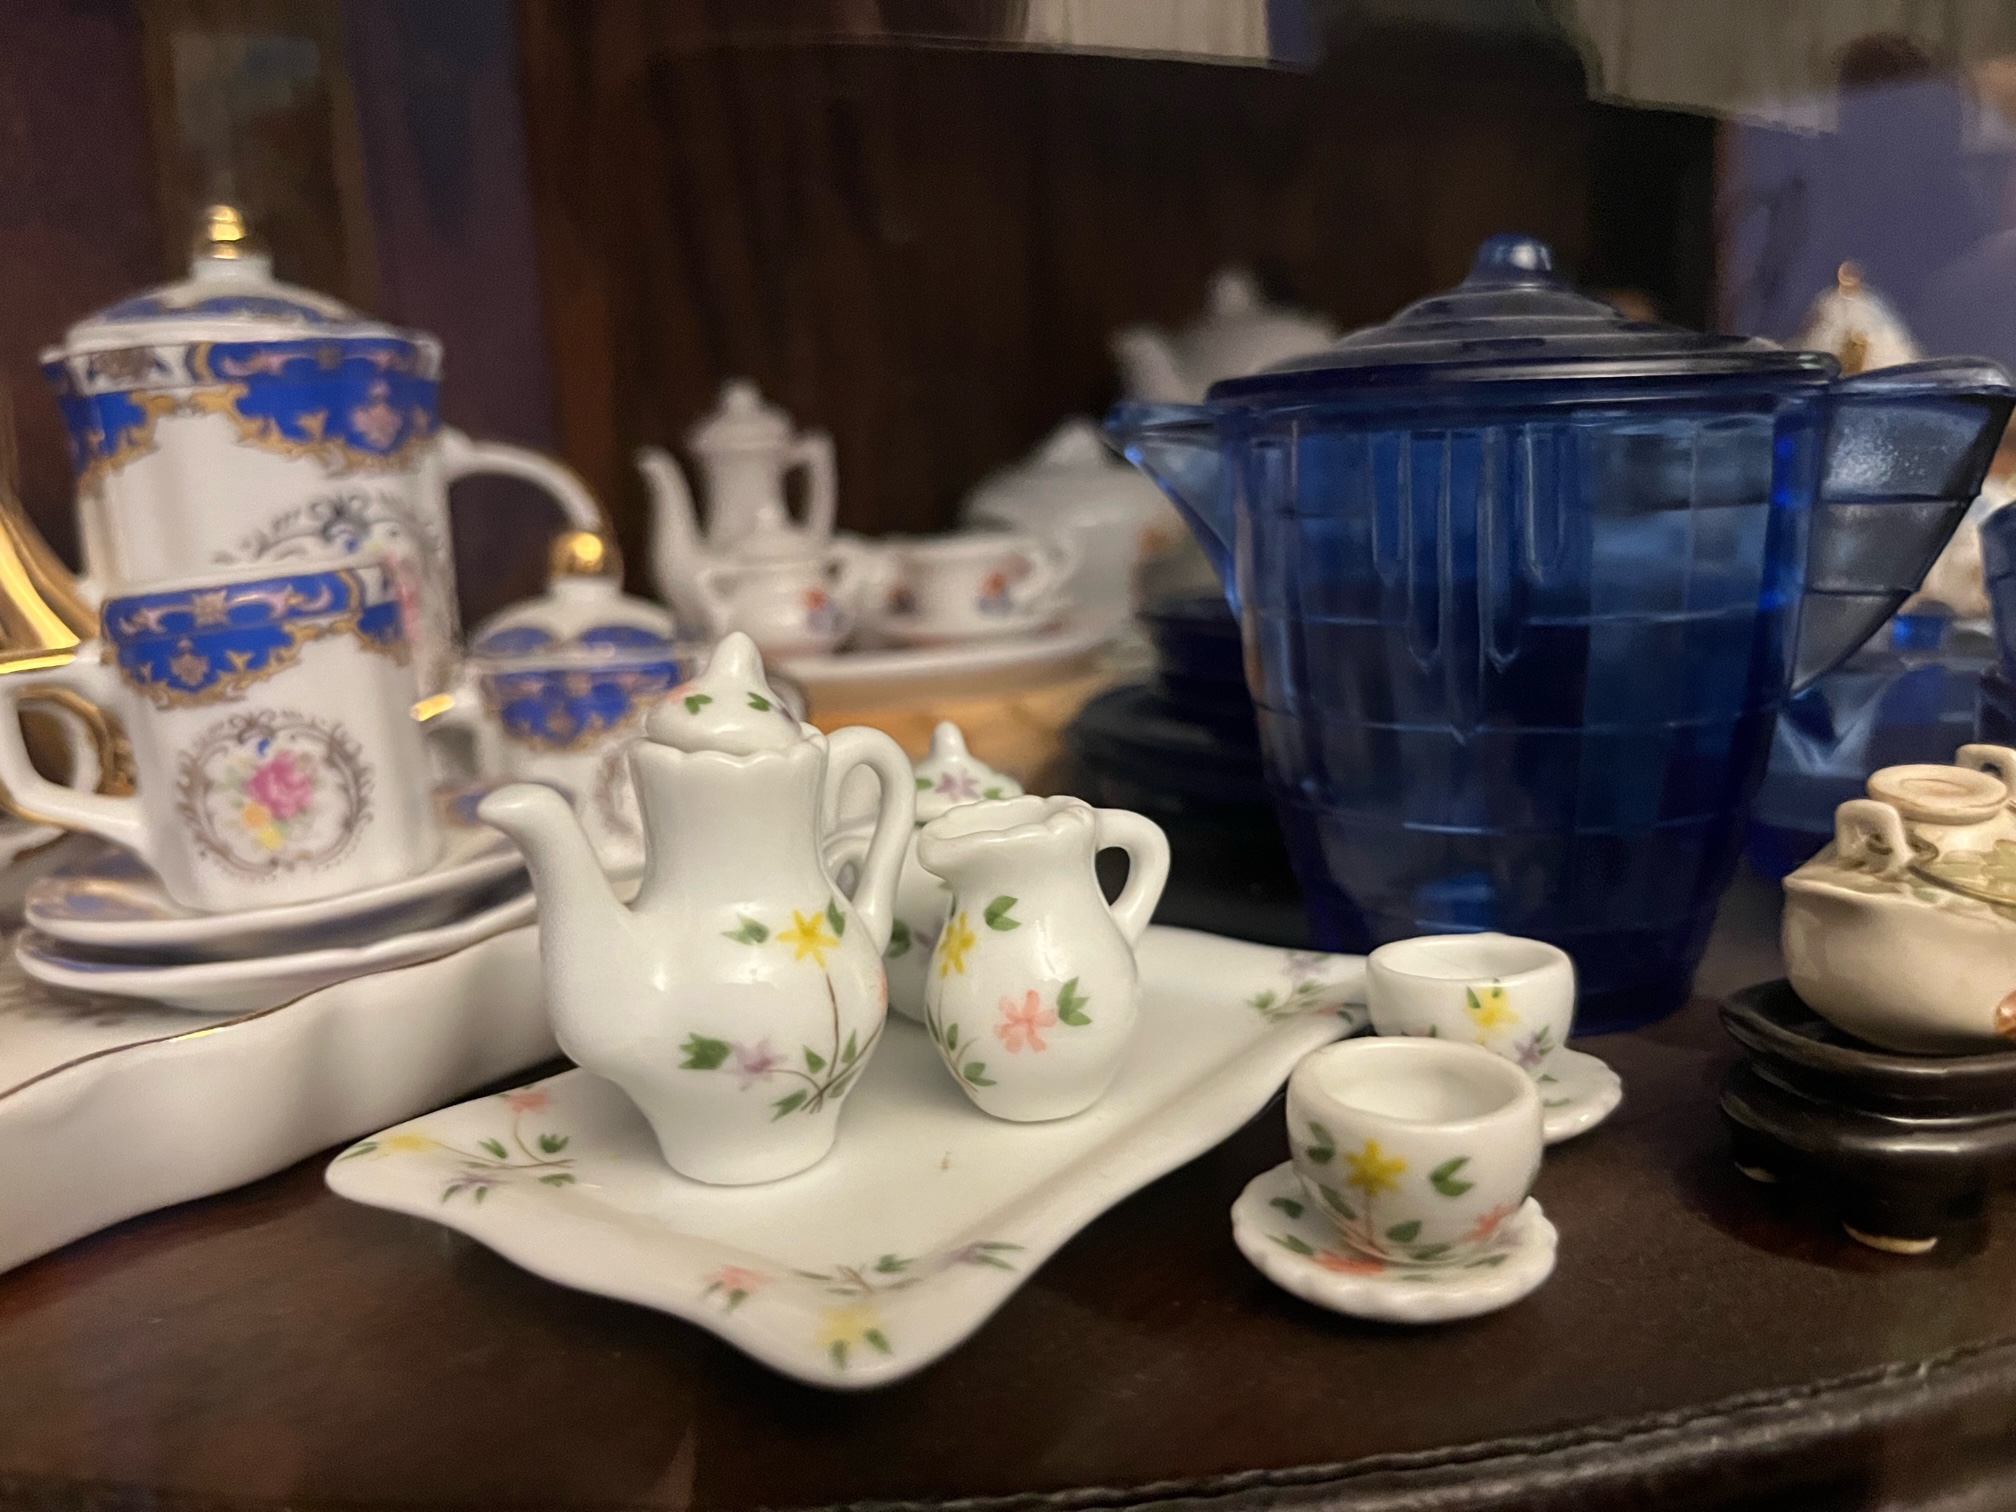 Photo of sample of miniature tea sets from the private collection.